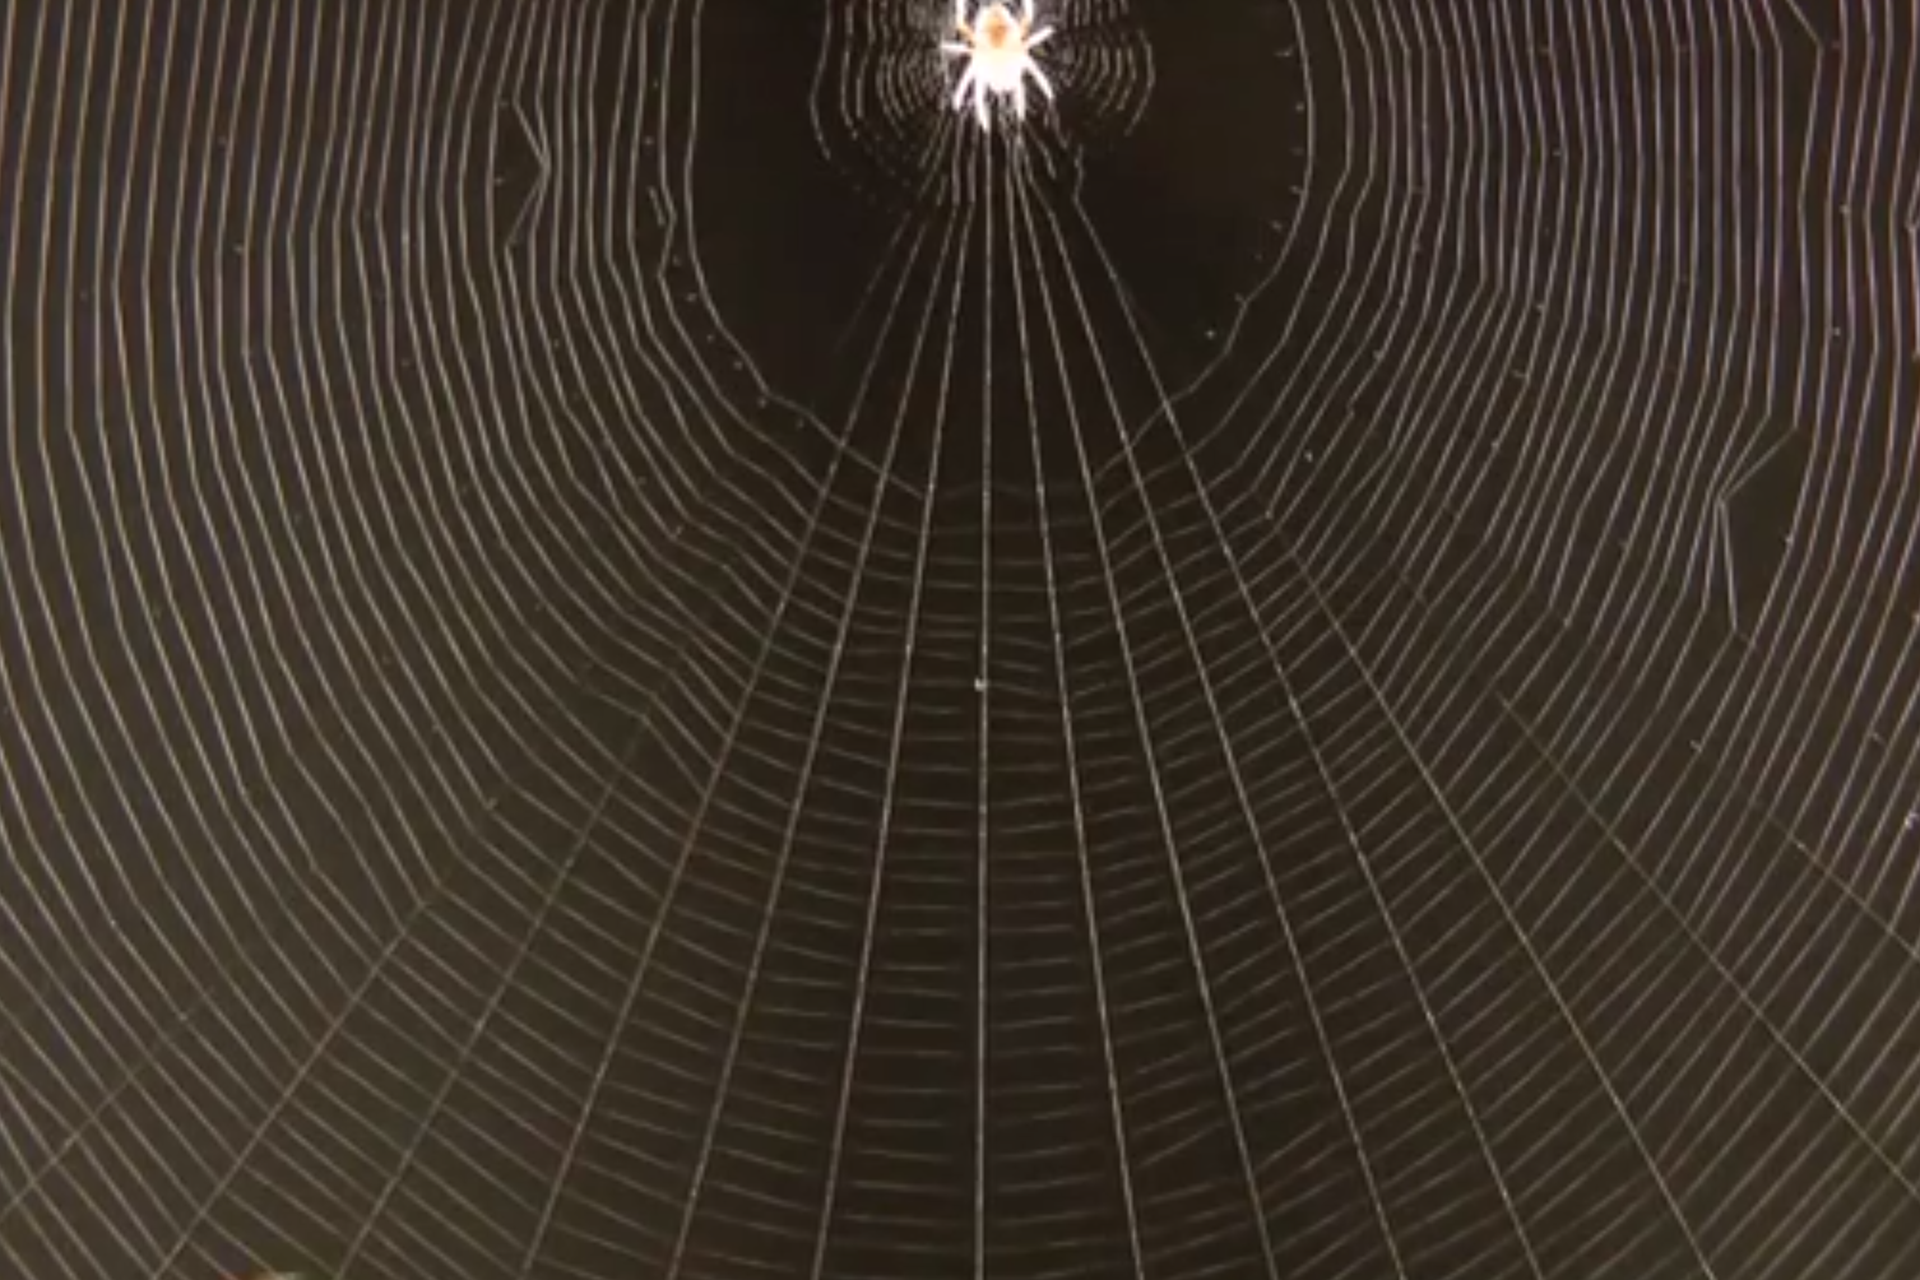 Spider catching prey using web vibrations